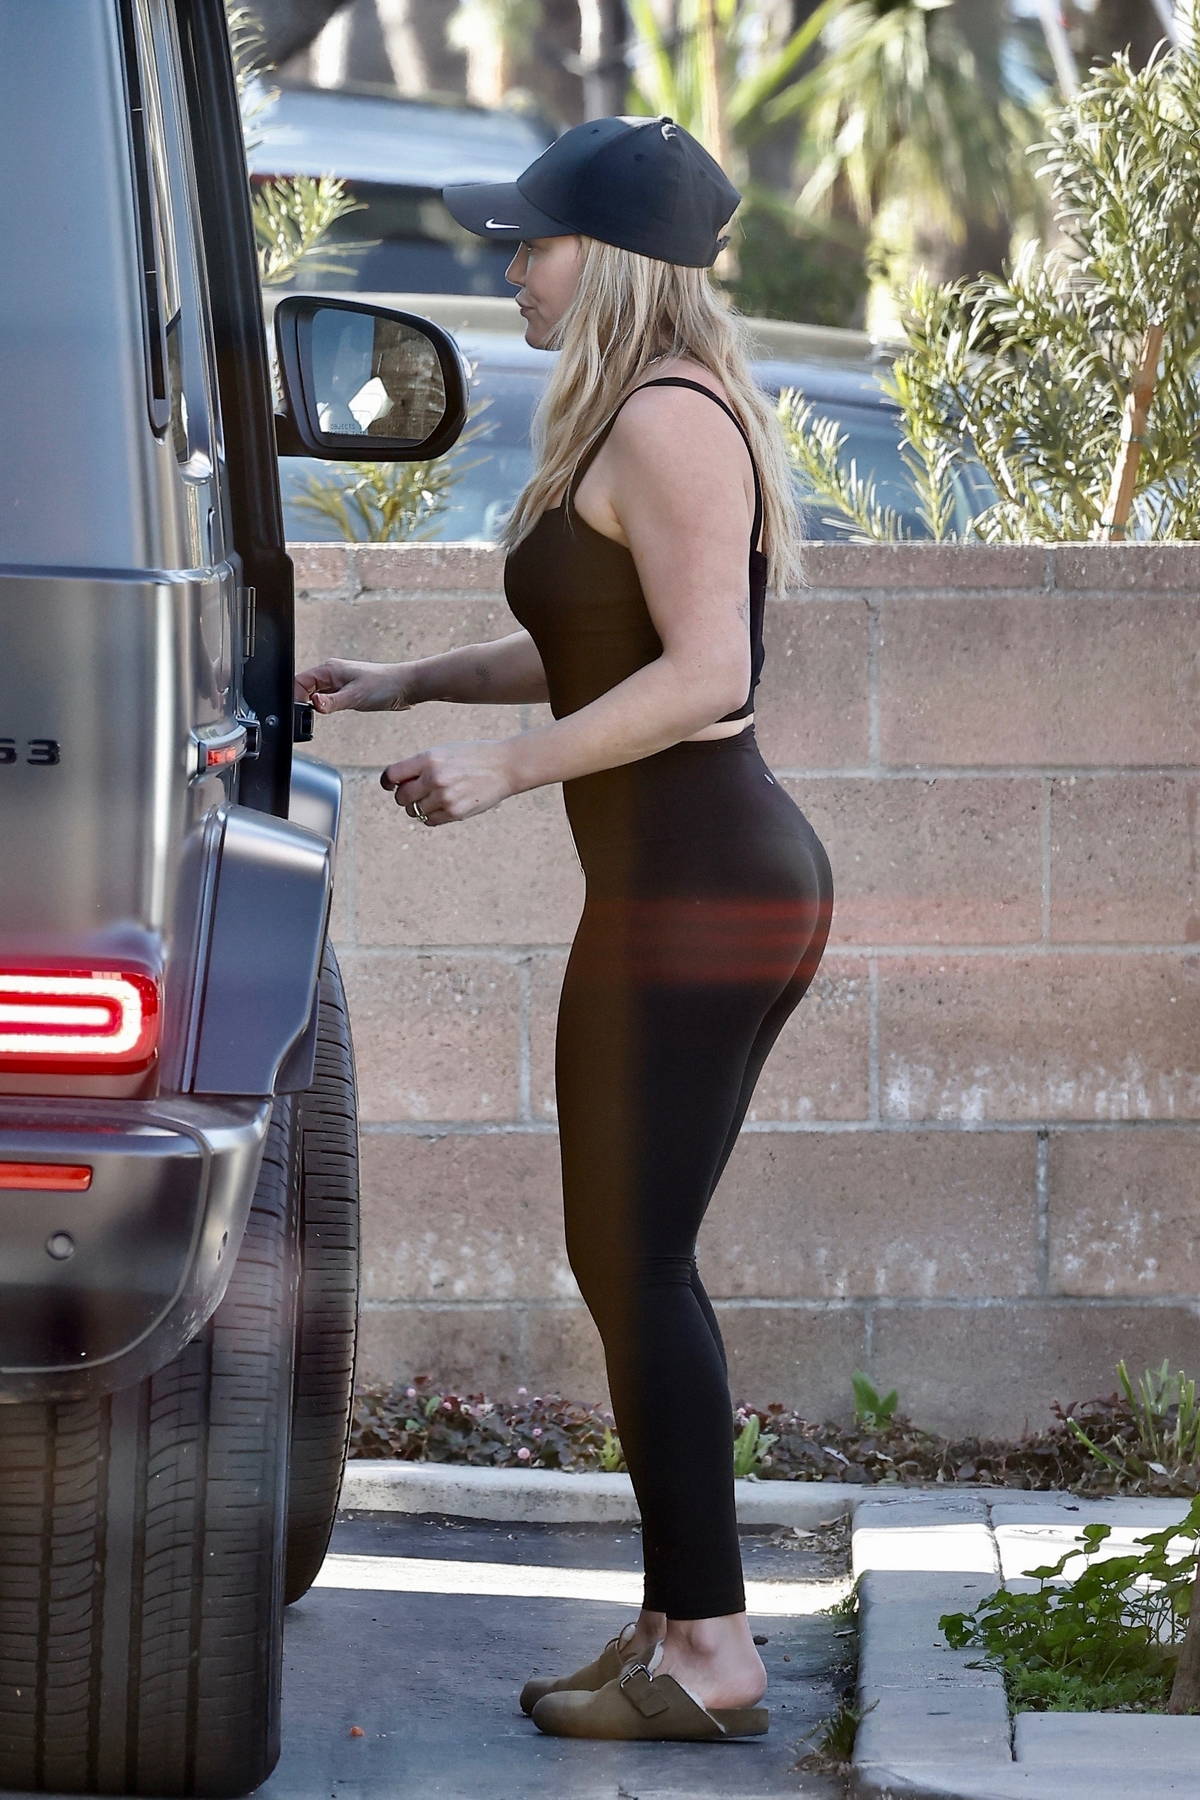 hilary duff looks fit in a black top and leggings as she hits the